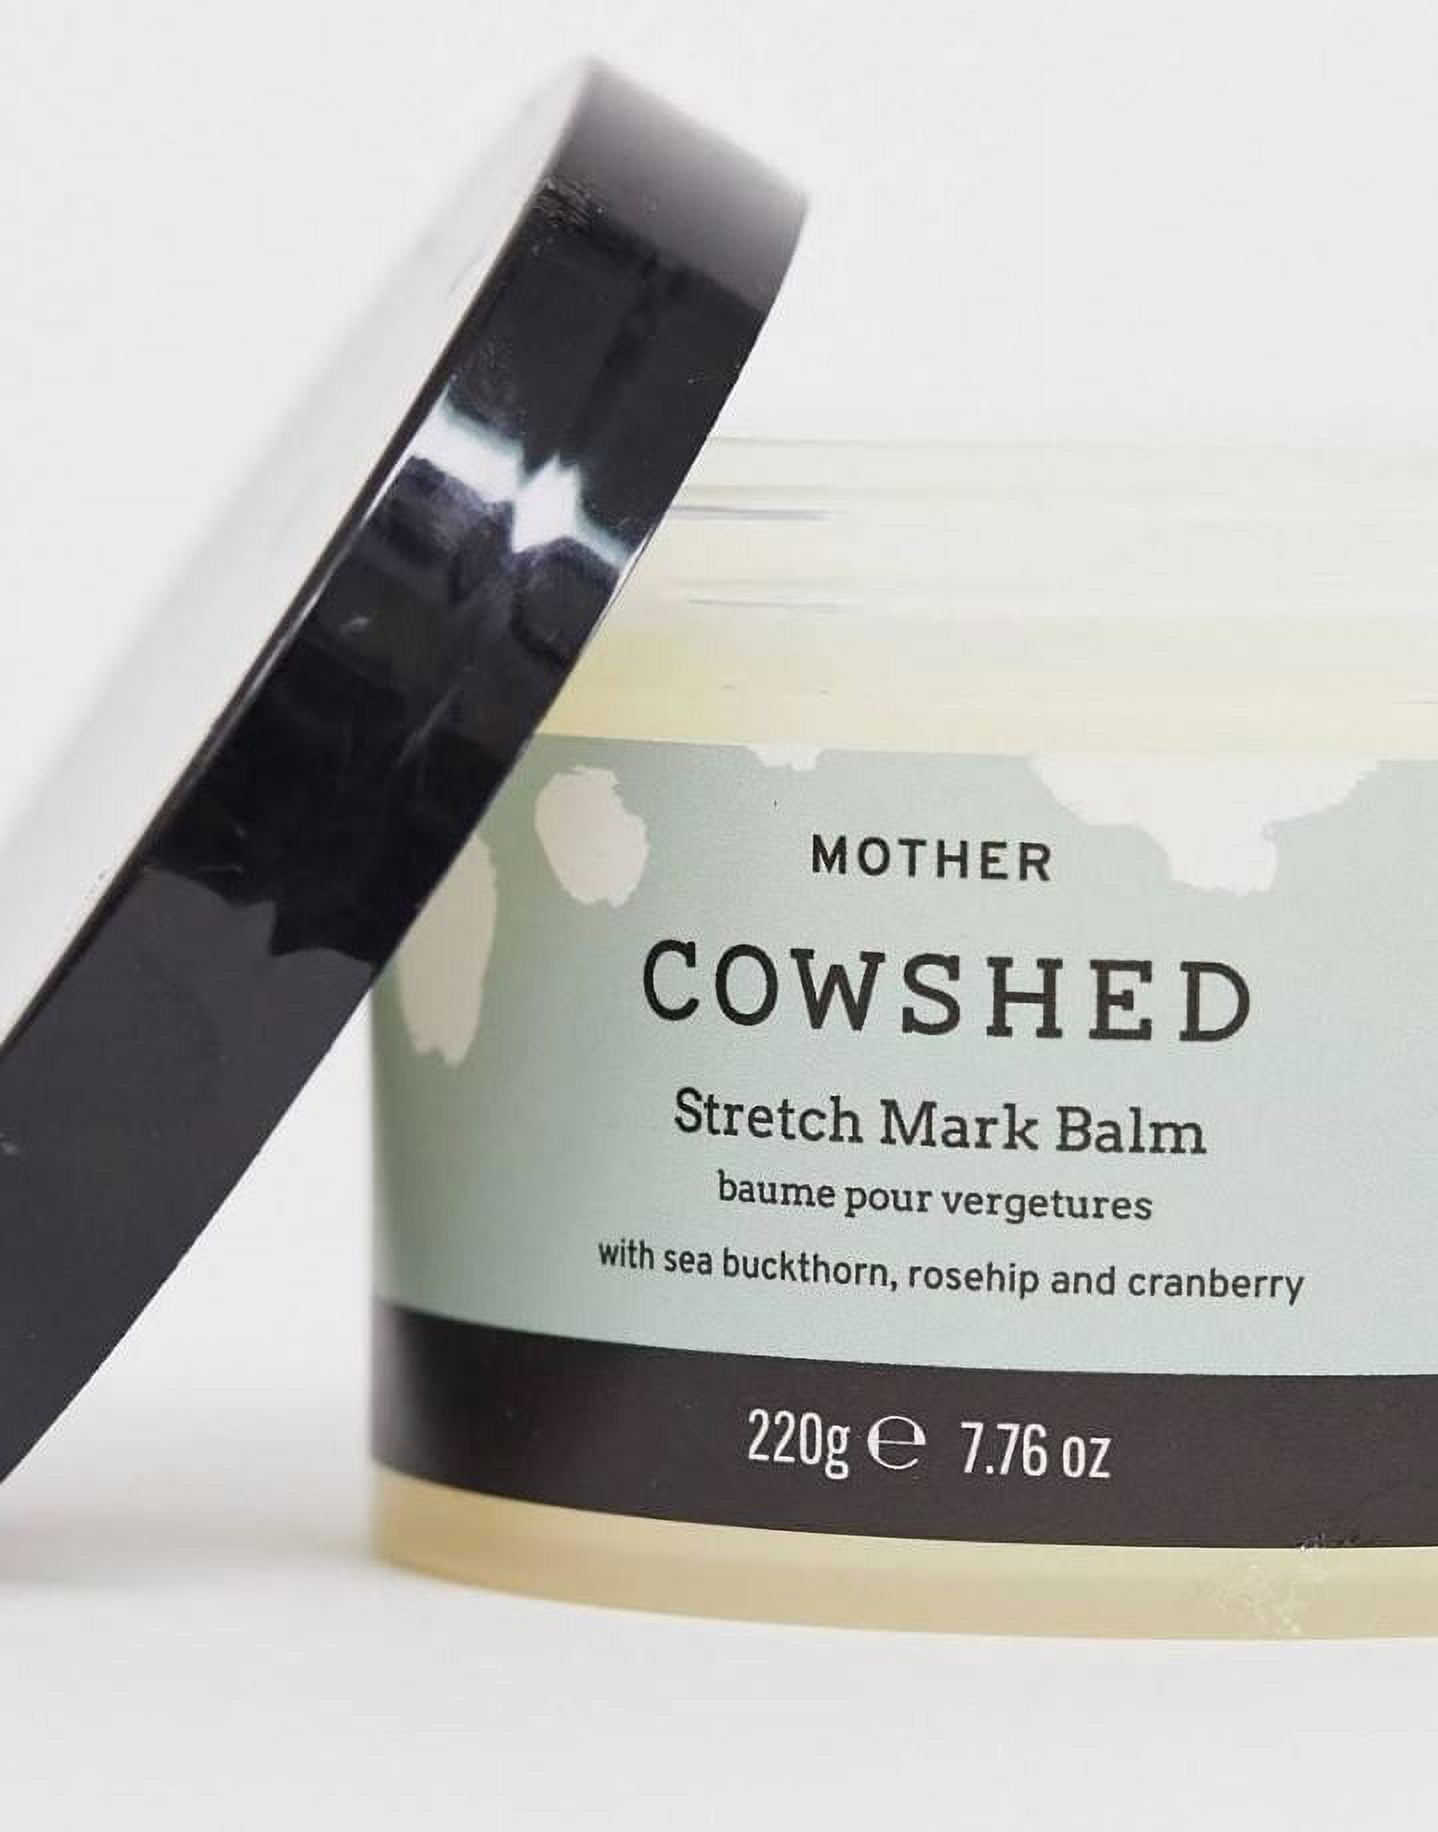 Cowshed Mother Stretch Mark Balm, 220g - Soho Home